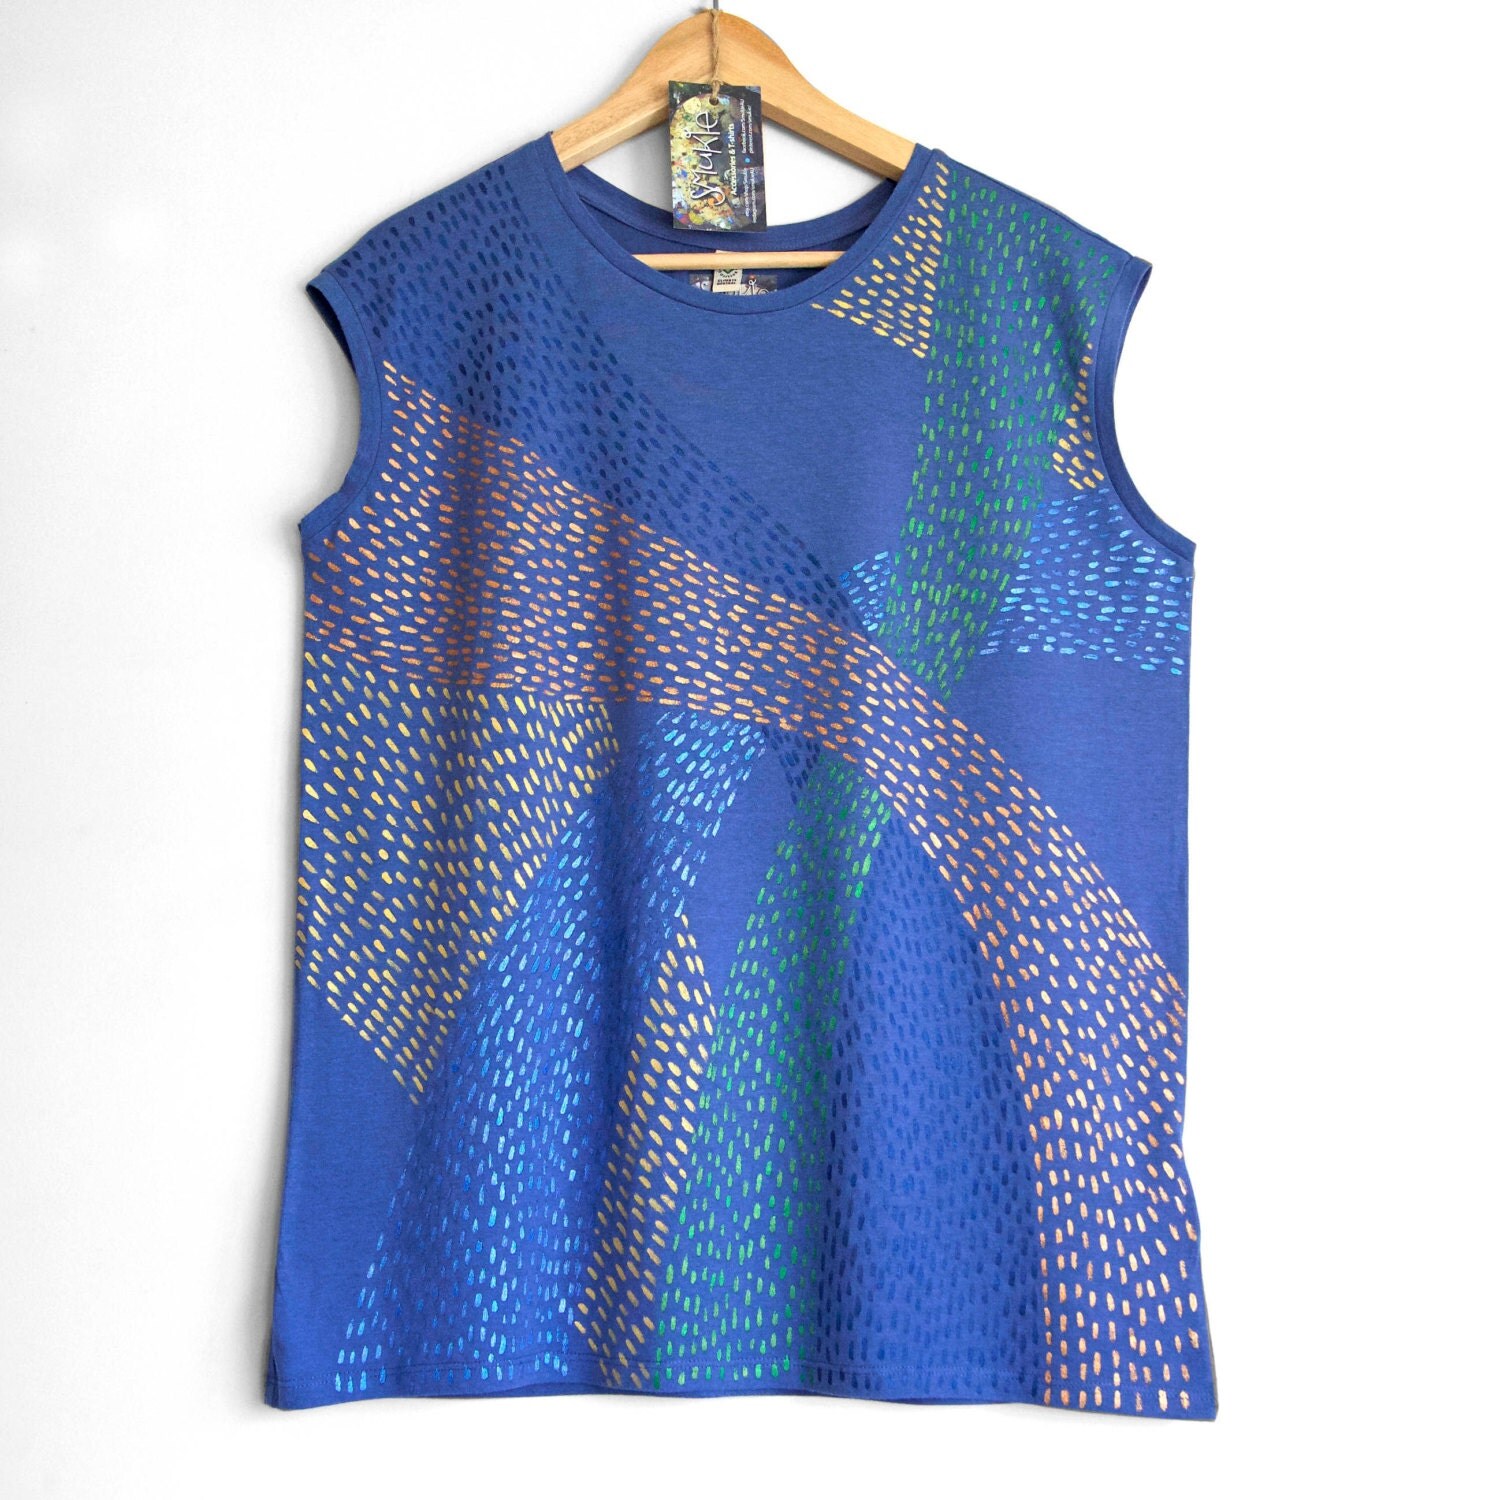 SHINY BLUE top. Blue Ladies sleeveless top with a shiny painted pattern ...